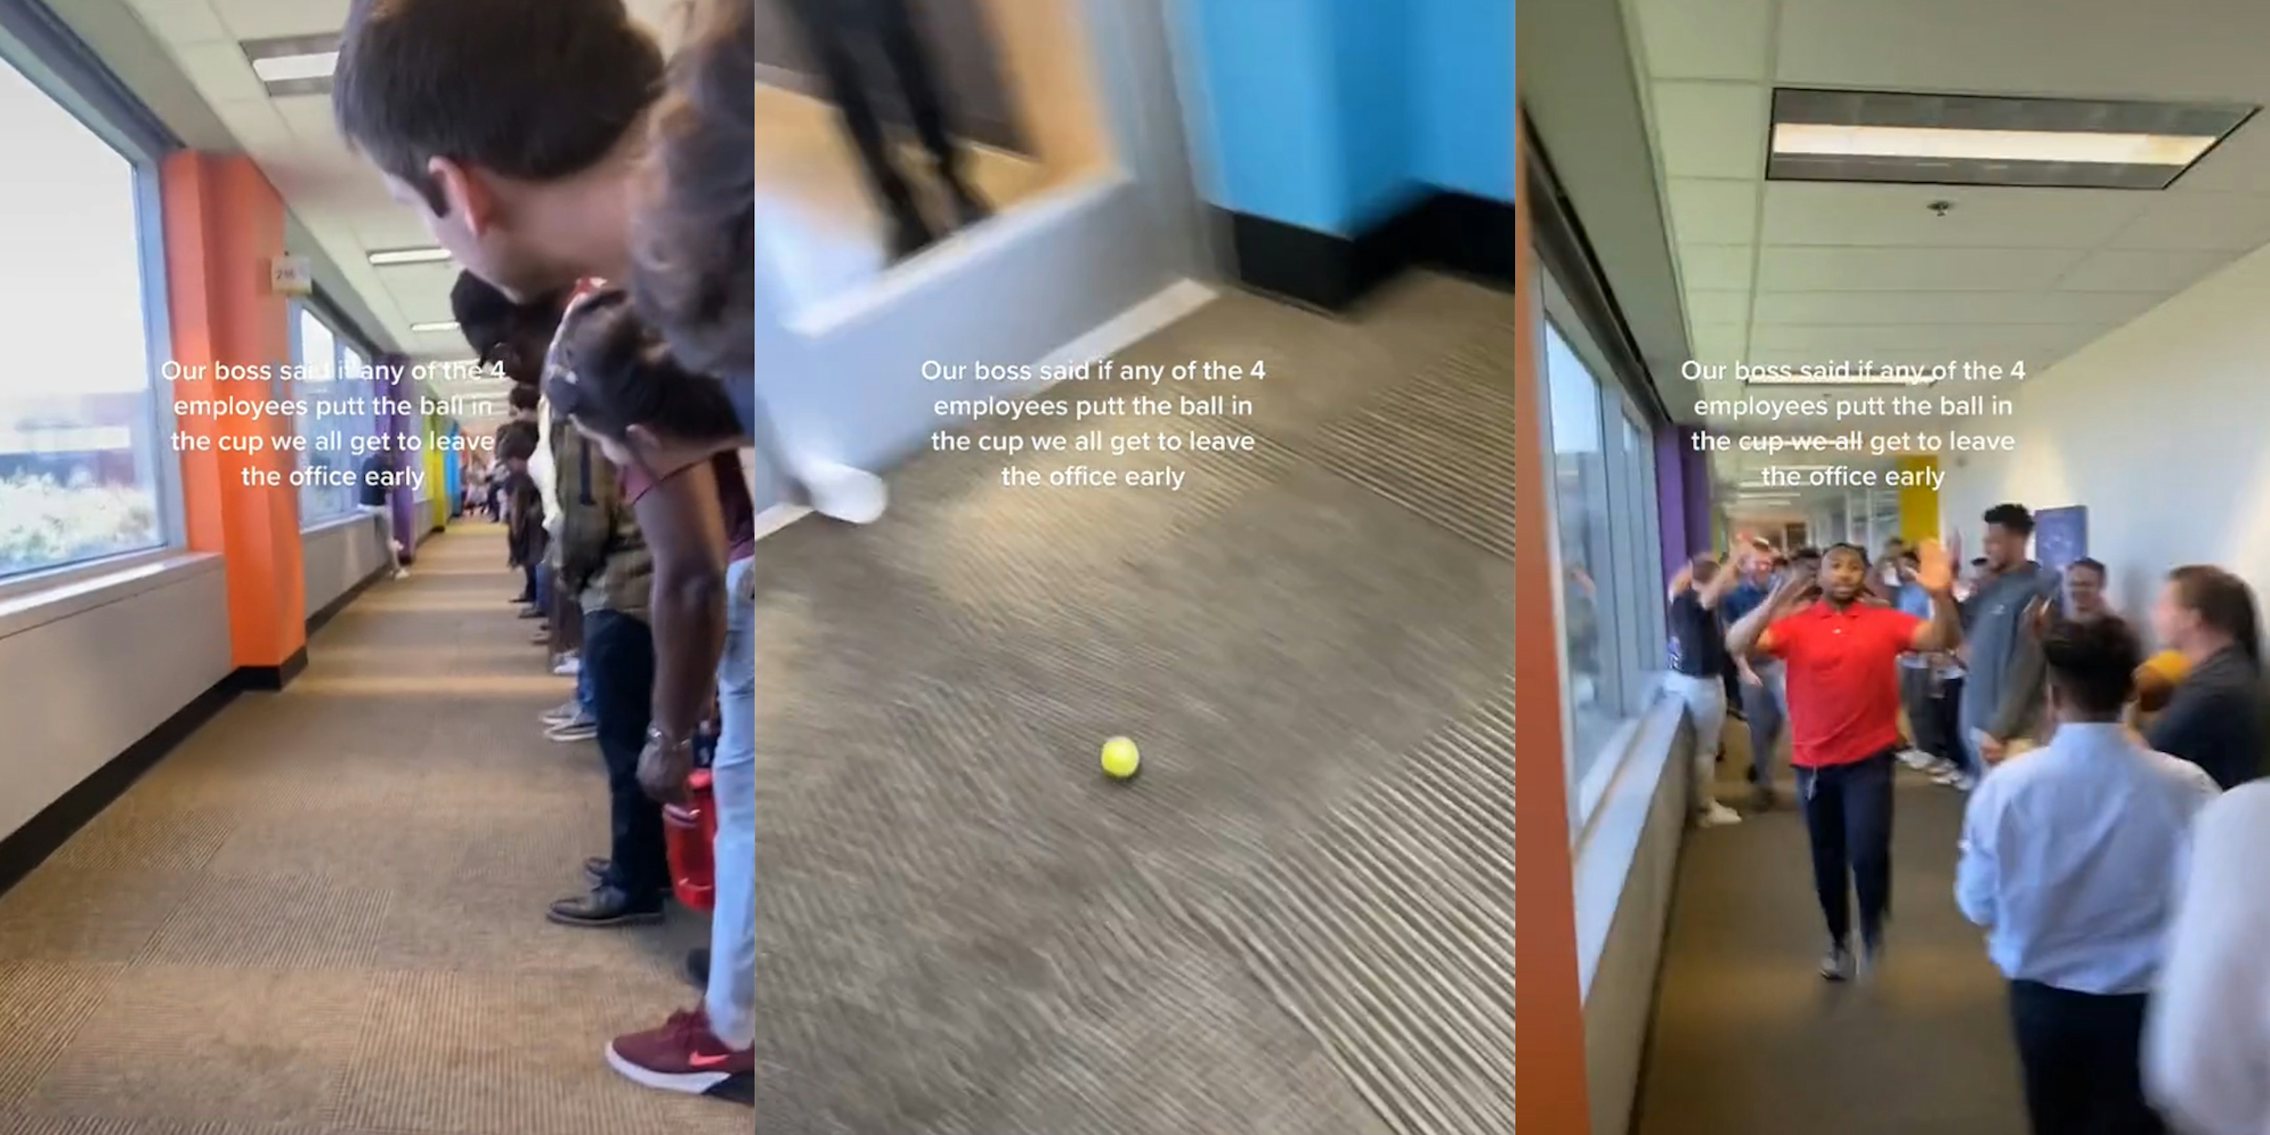 people leaning in hallway watching golf ball (l) golf ball about to enter cup (c) man celebrating with co-workers cheering in hallway (r) all with caption 'our boss said if any of the 4 employees putt the ball in the cup we all get to leave the office early'